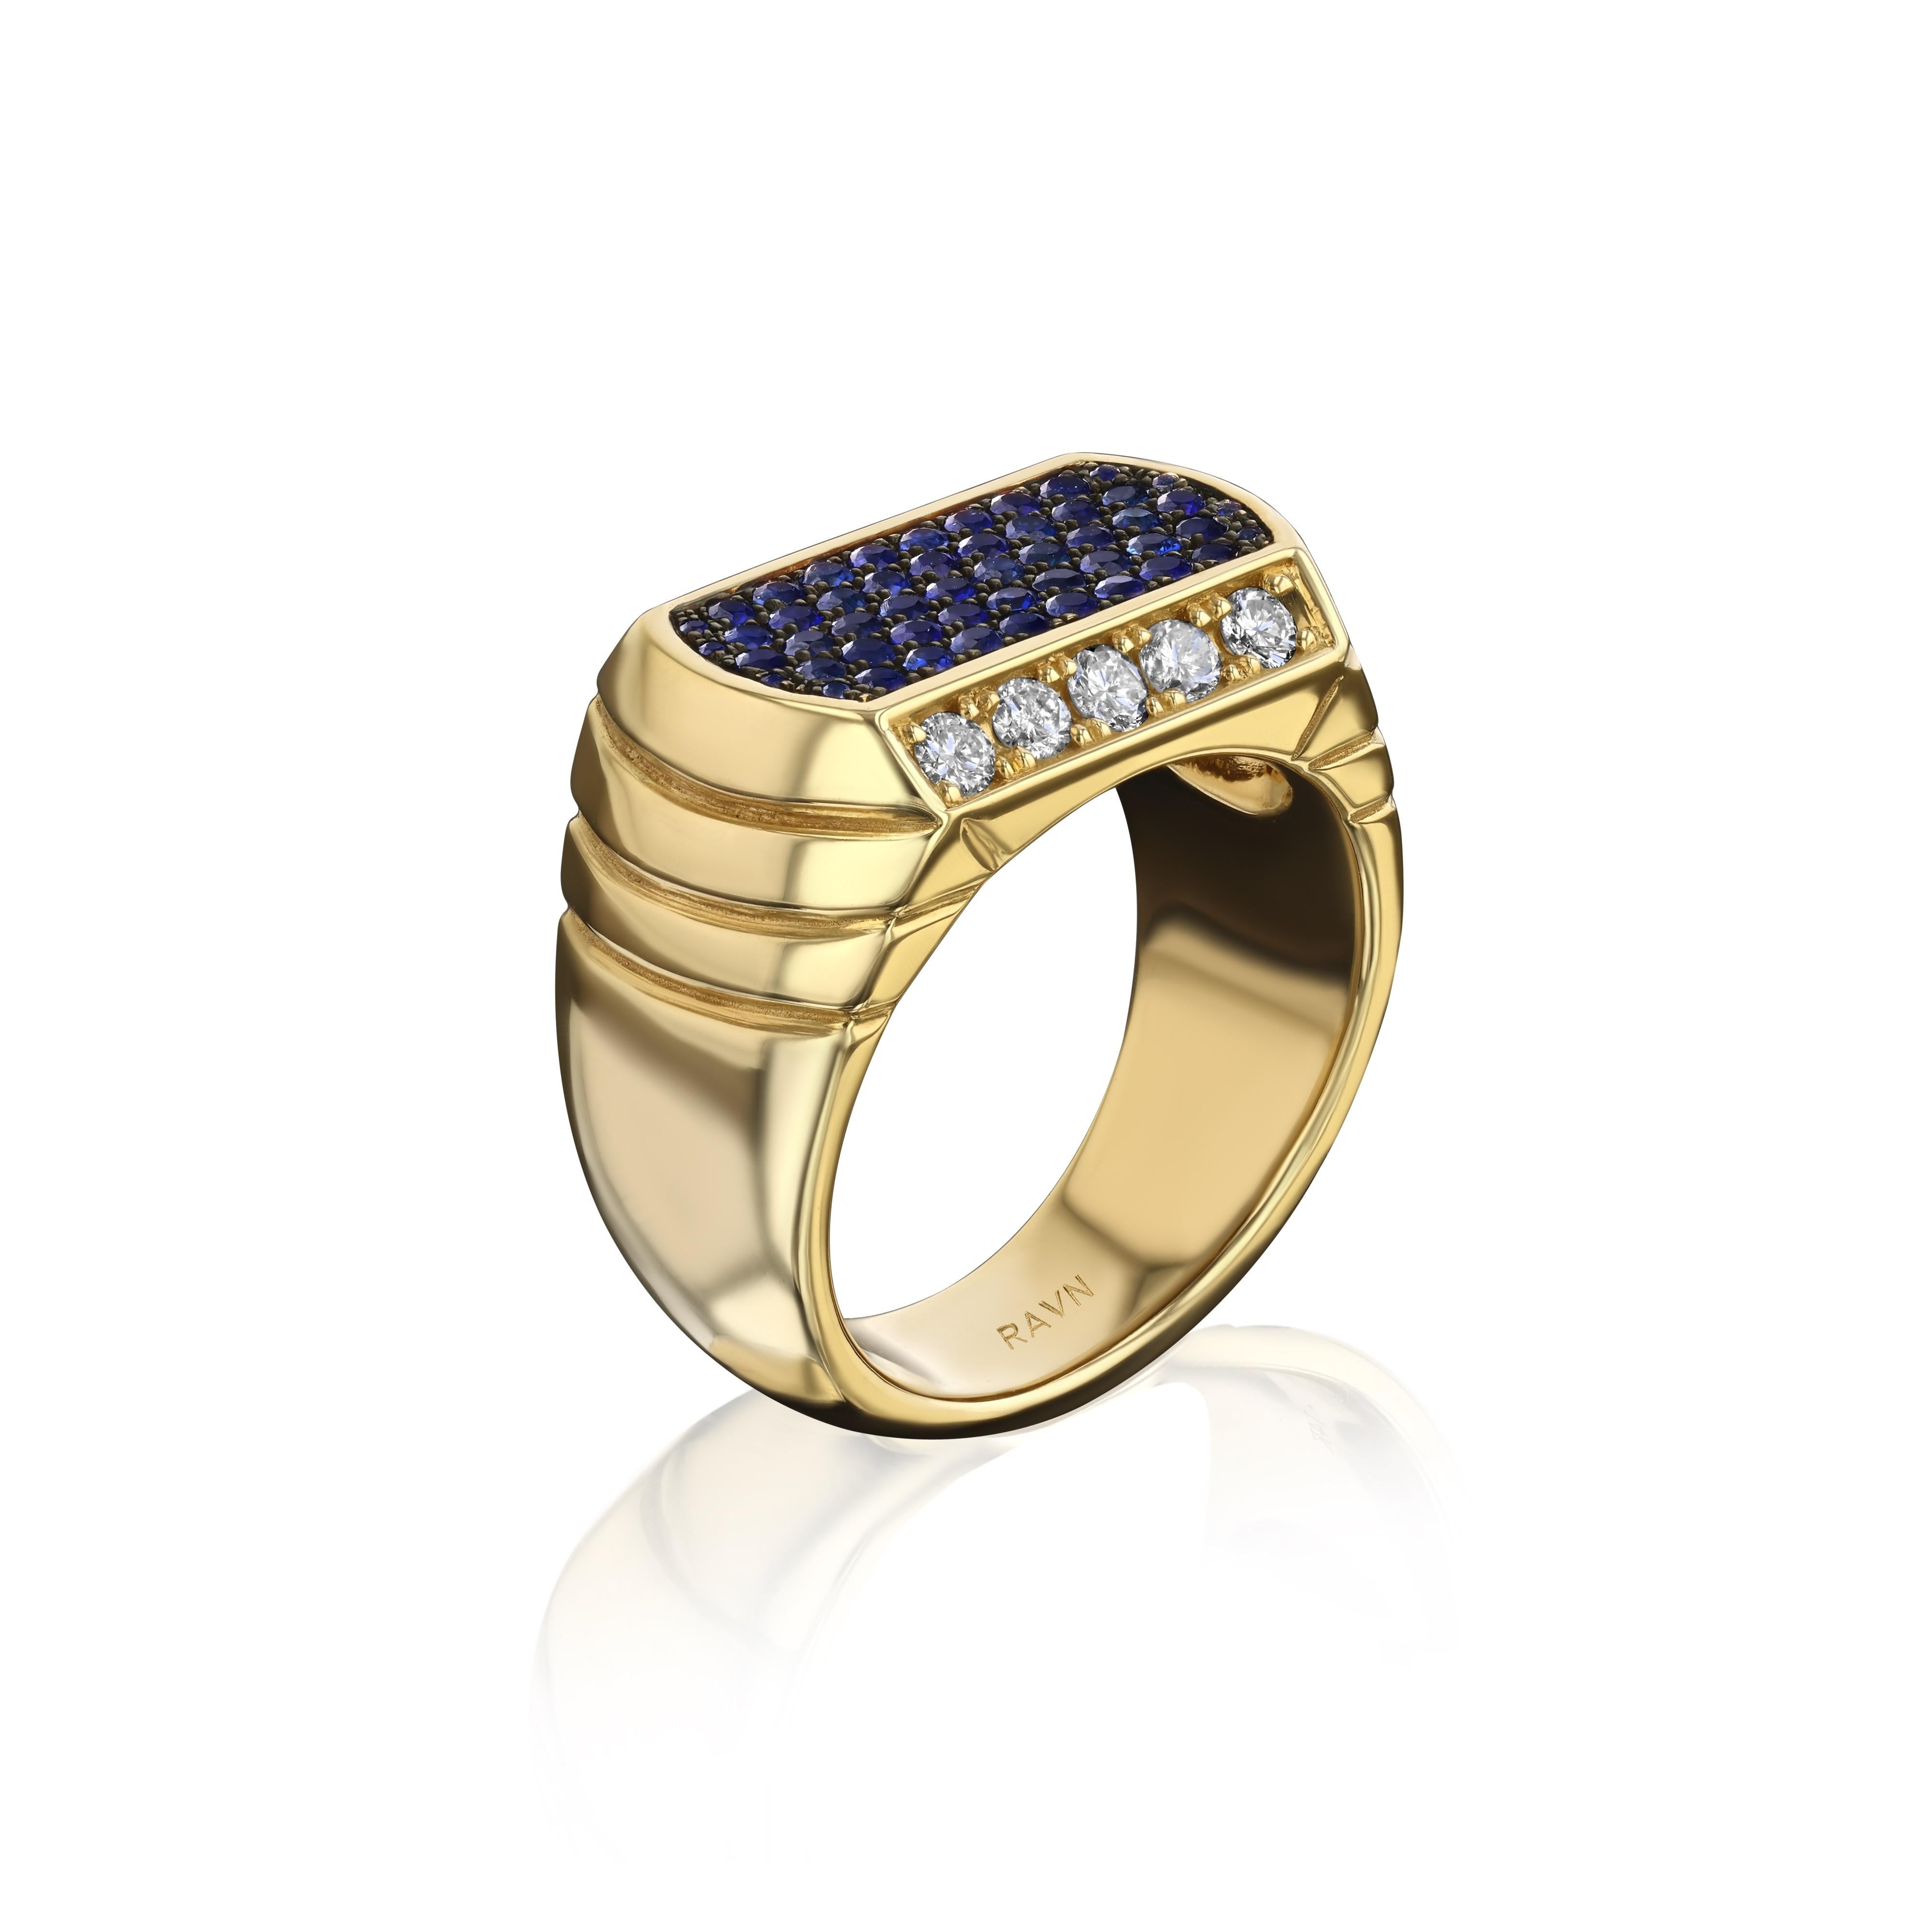 Round Cut House of RAVN, 14k Gold Unisex Art Deco Signet Ring, with Diamonds and Sapphires For Sale